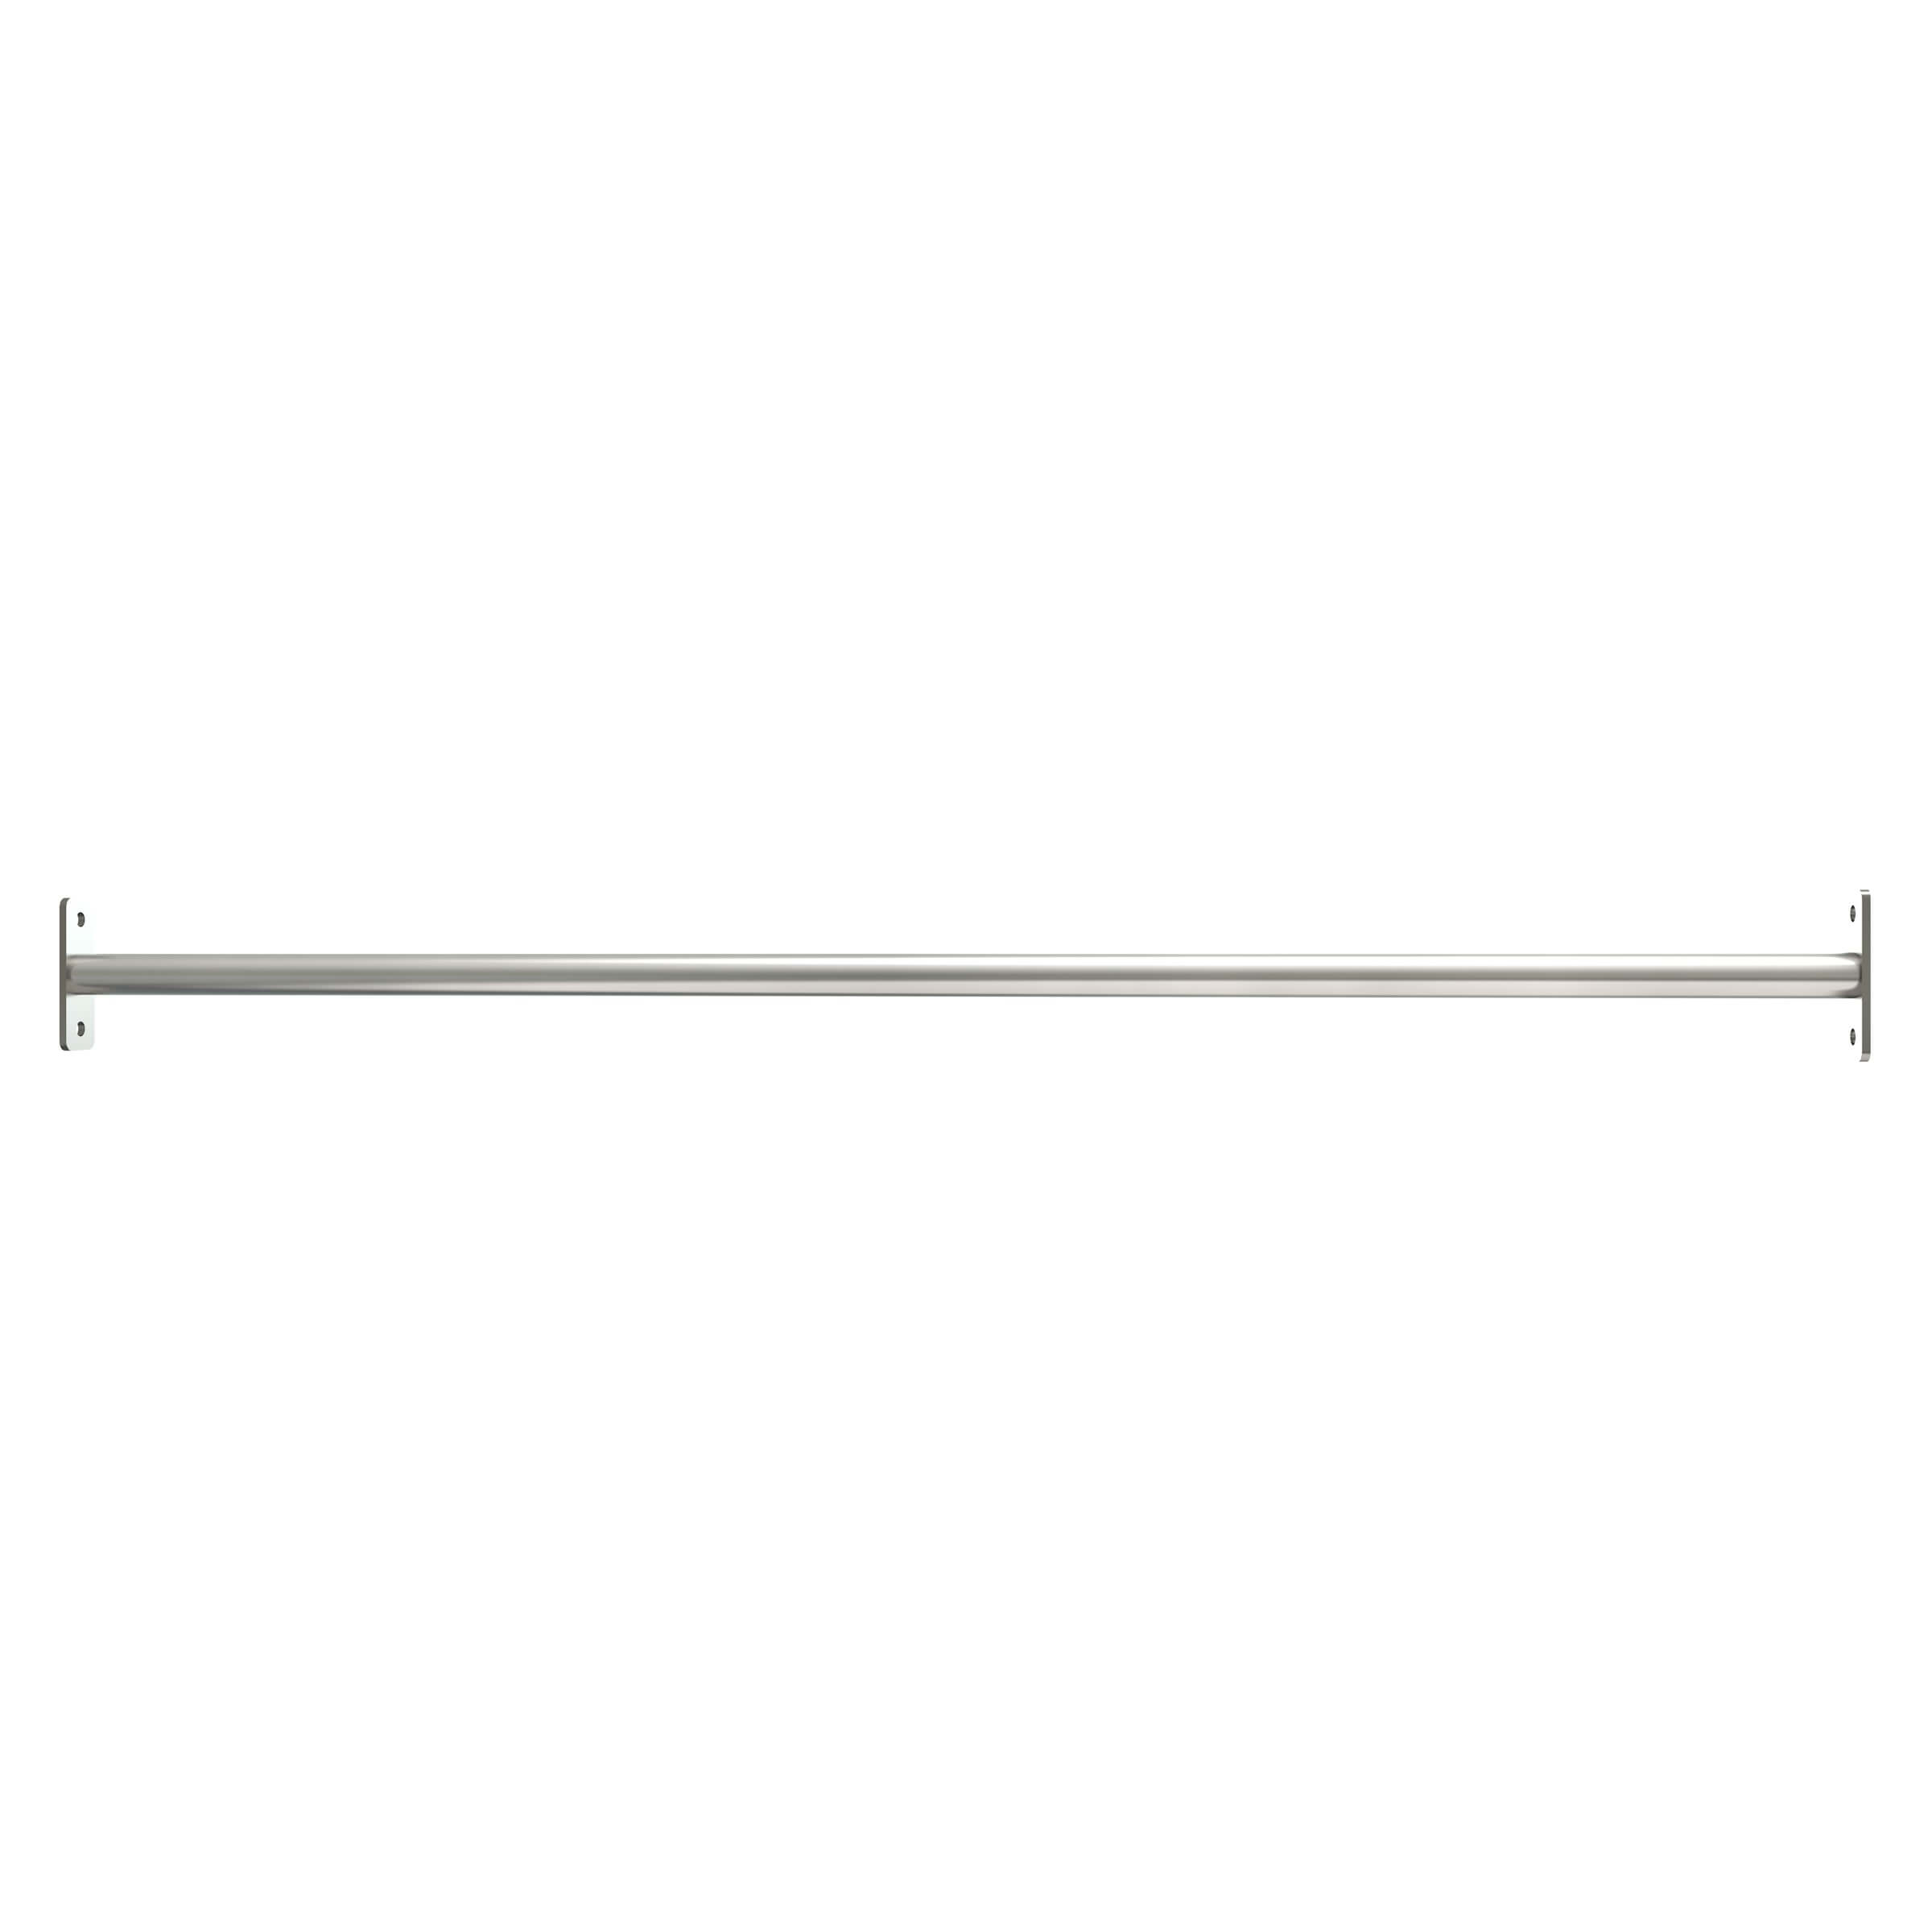 Pull-up bar V2A stainless steel with double fastening straps, glass bead blasted, length 140 cm